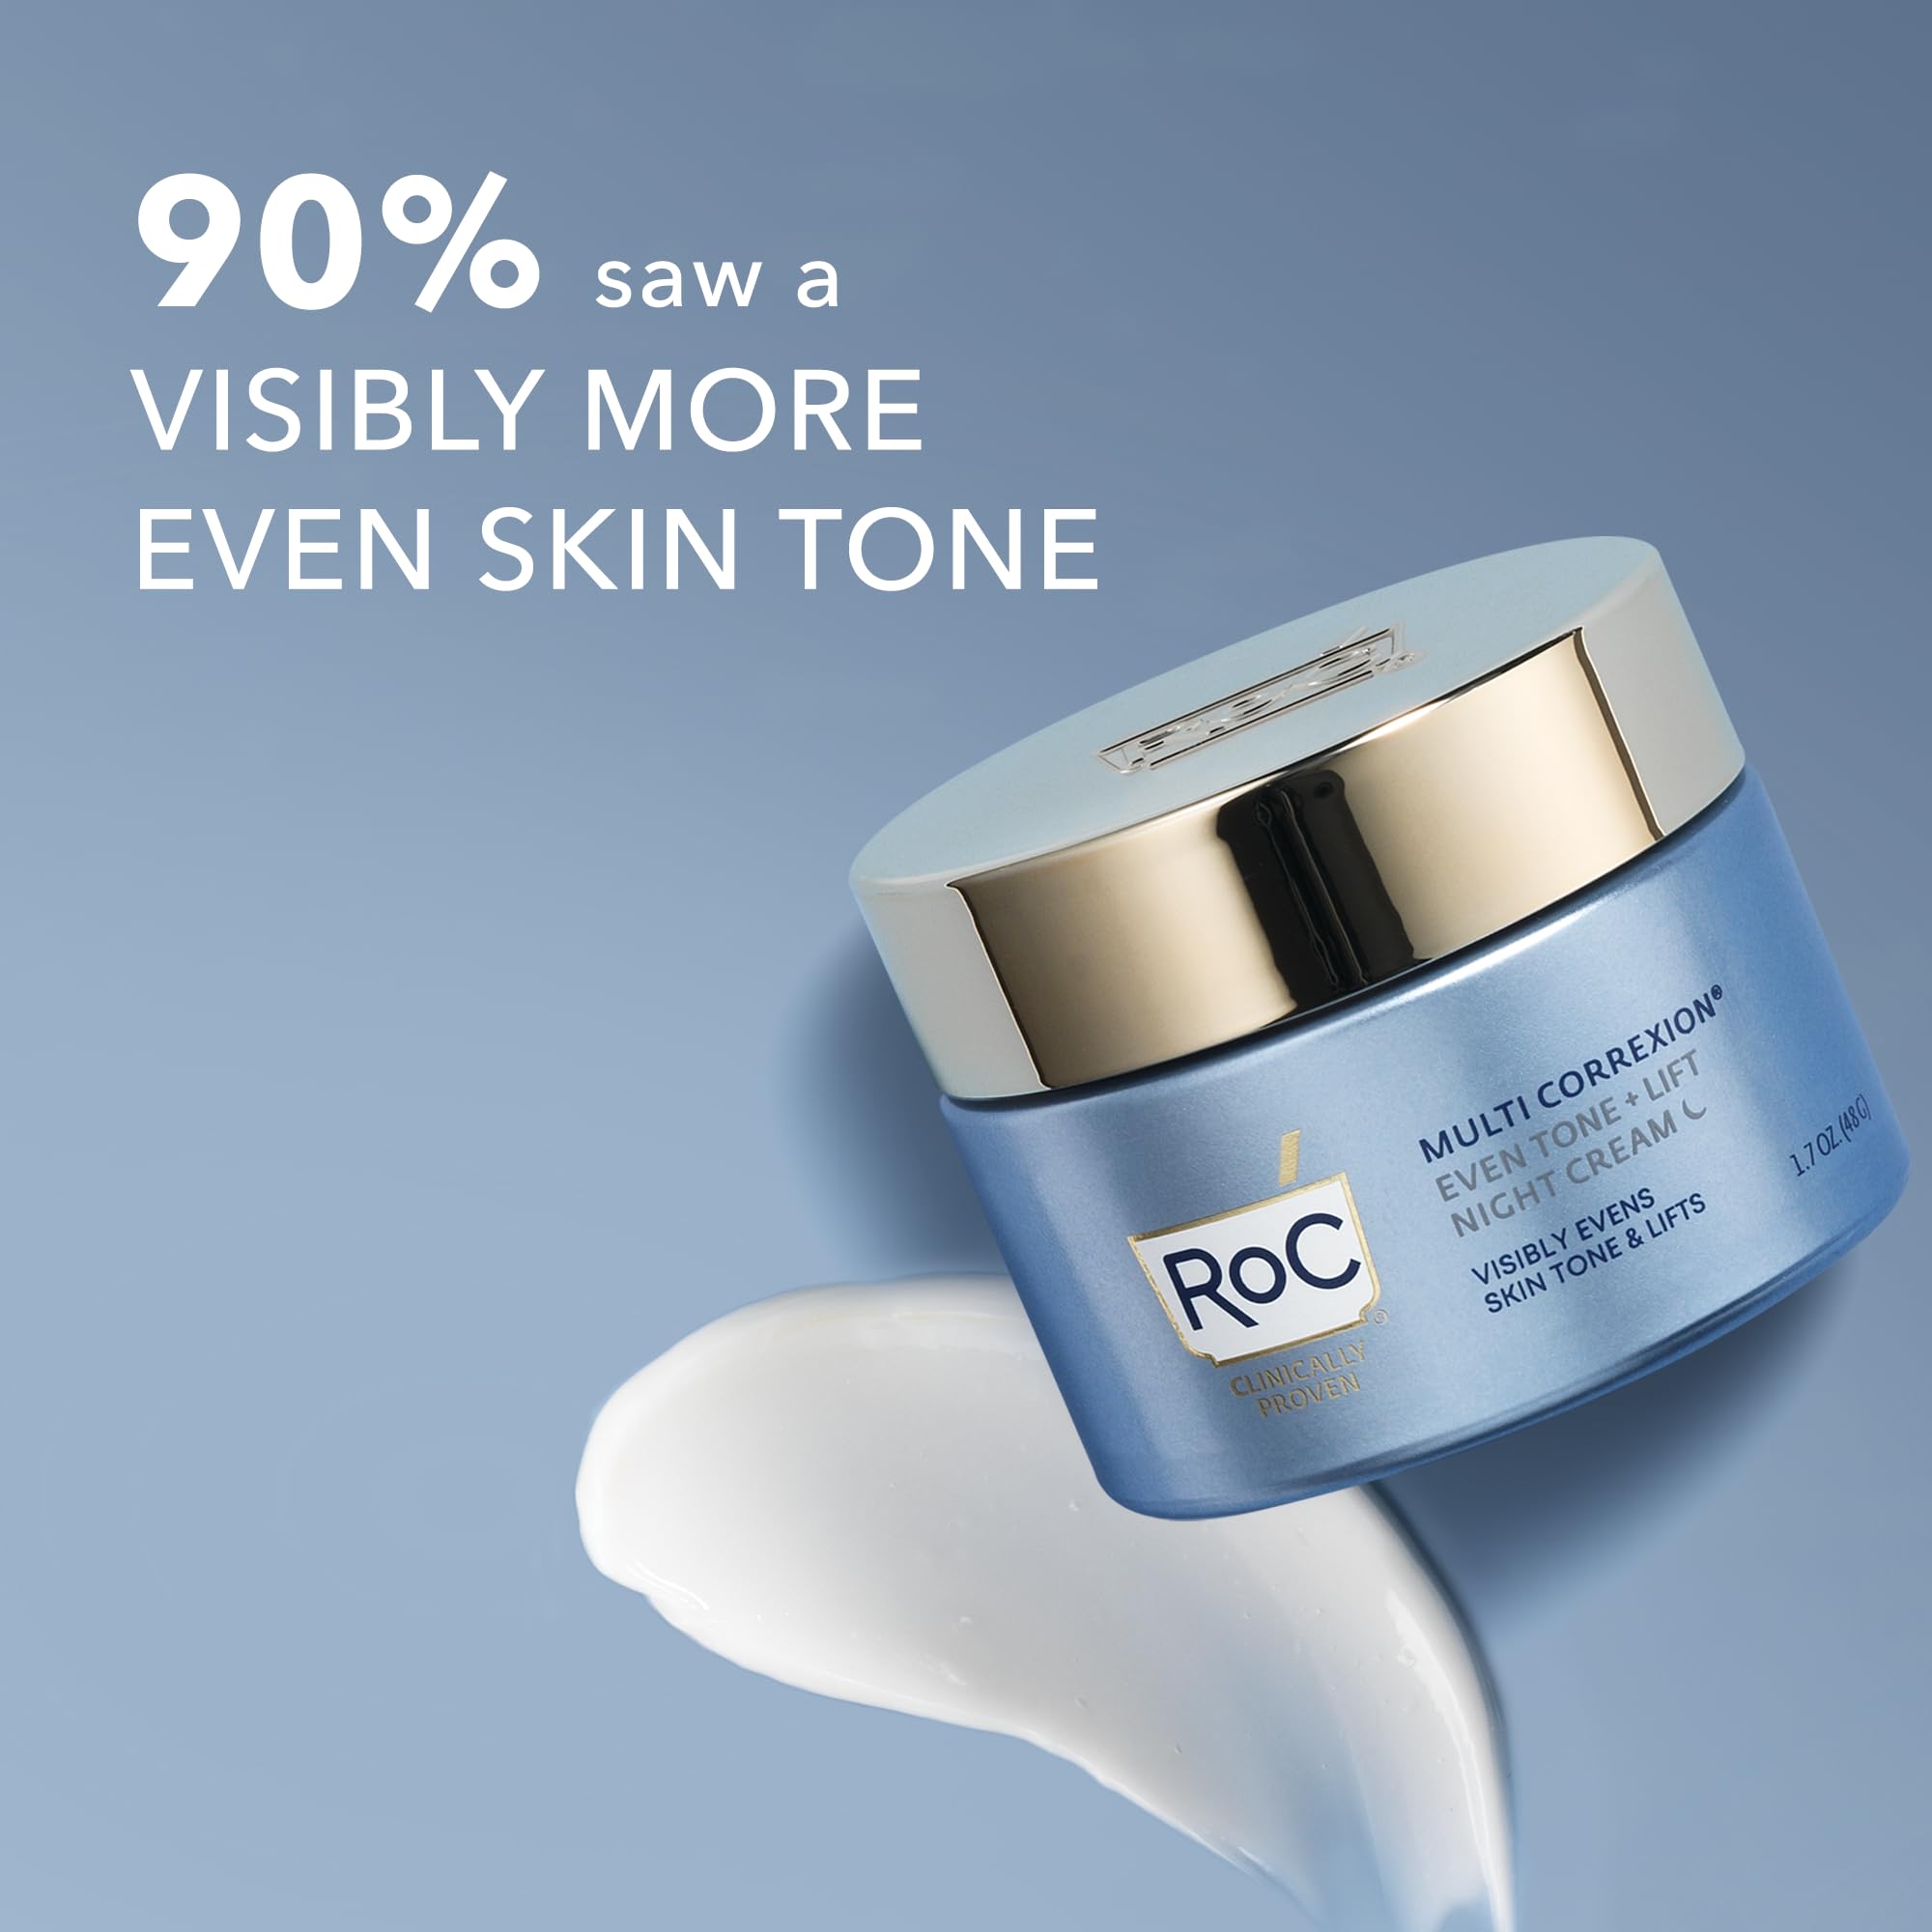 RoC Multi Correxion 5 in 1 Restoring/Anti Aging Facial Night Cream with Hexinol, 1.7 Oz (Packaging May Vary)